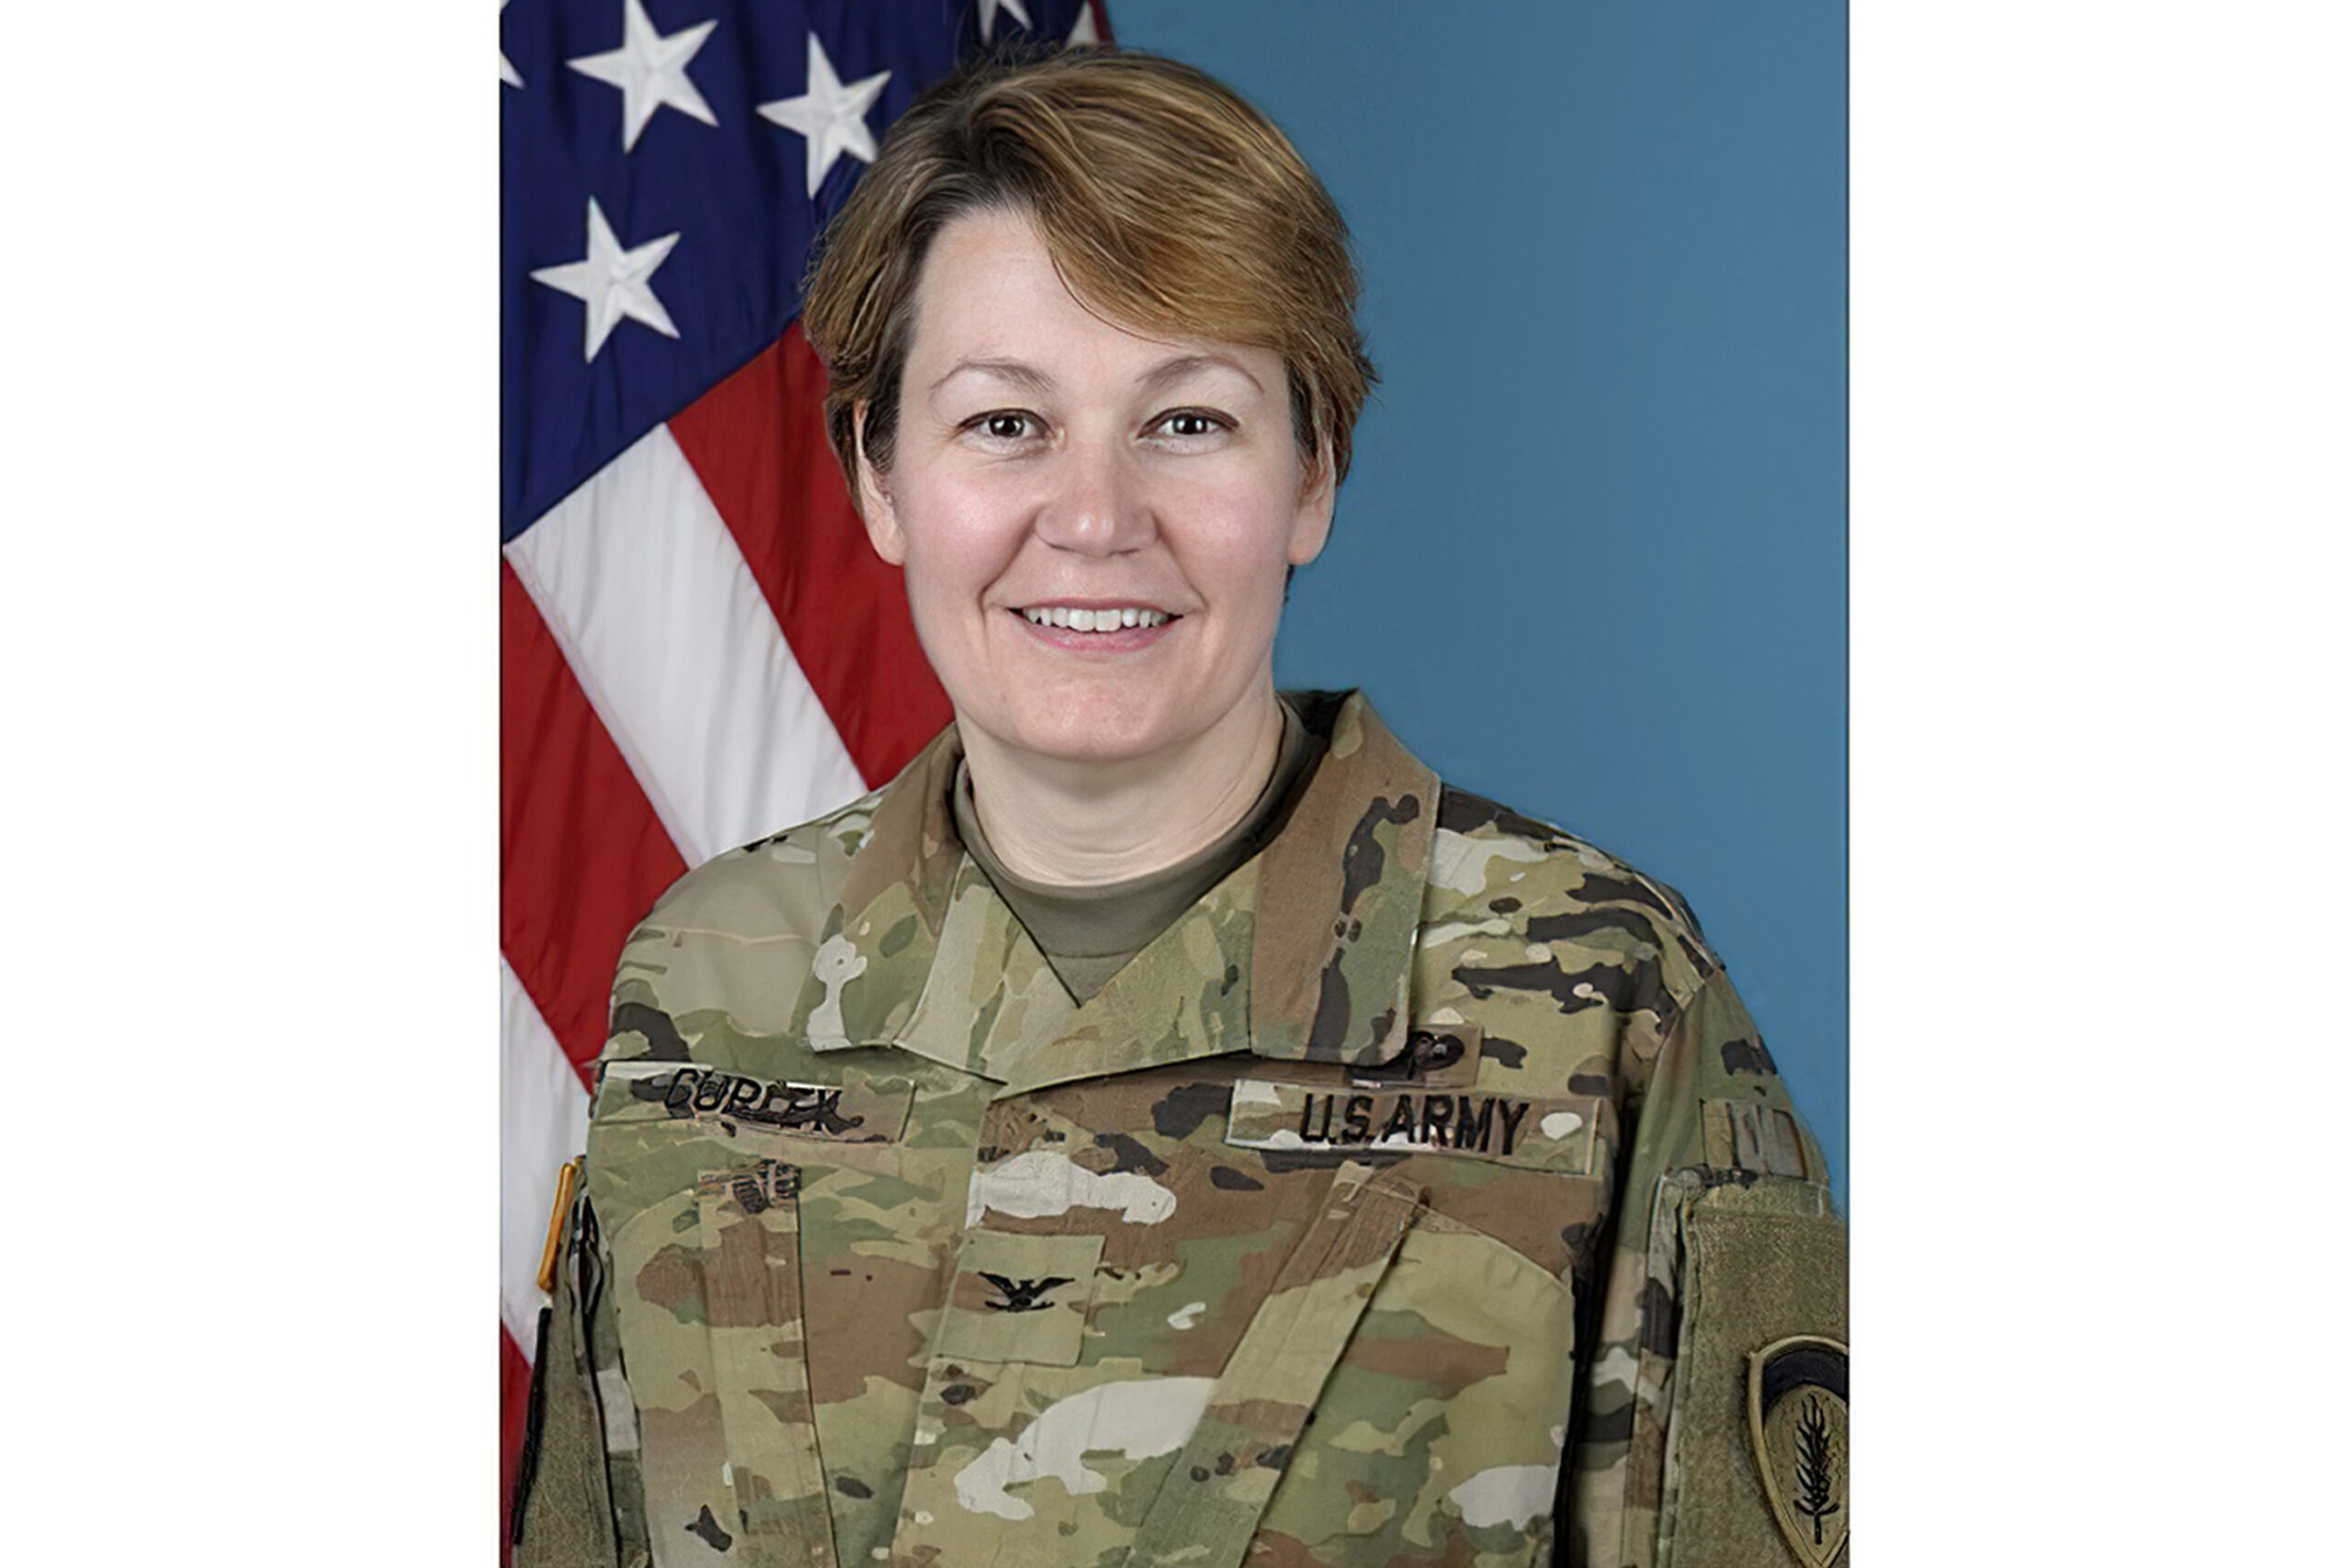 This image provided by the U.S. Army shows Col. Gail Curley. When Gail Curley began her job as Marshal of the U.S. Supreme Court less than a year ago, she would have expected to work mostly behind the scenes: overseeing the court’s police force and the operations of the marble-columned building where the justices work. Earlier this month, however, Curley was handed a bombshell of an assignment, overseeing an investigation into the leak of a draft opinion and apparent votes in a major abortion case. People who know Curley described the former Army colonel, a military lawyer by training, as the right kind of person to be tasked with investigating a highly-charged leak: smart and unlikely to be intimidated but also apolitical and private. (U.S. Army via AP)